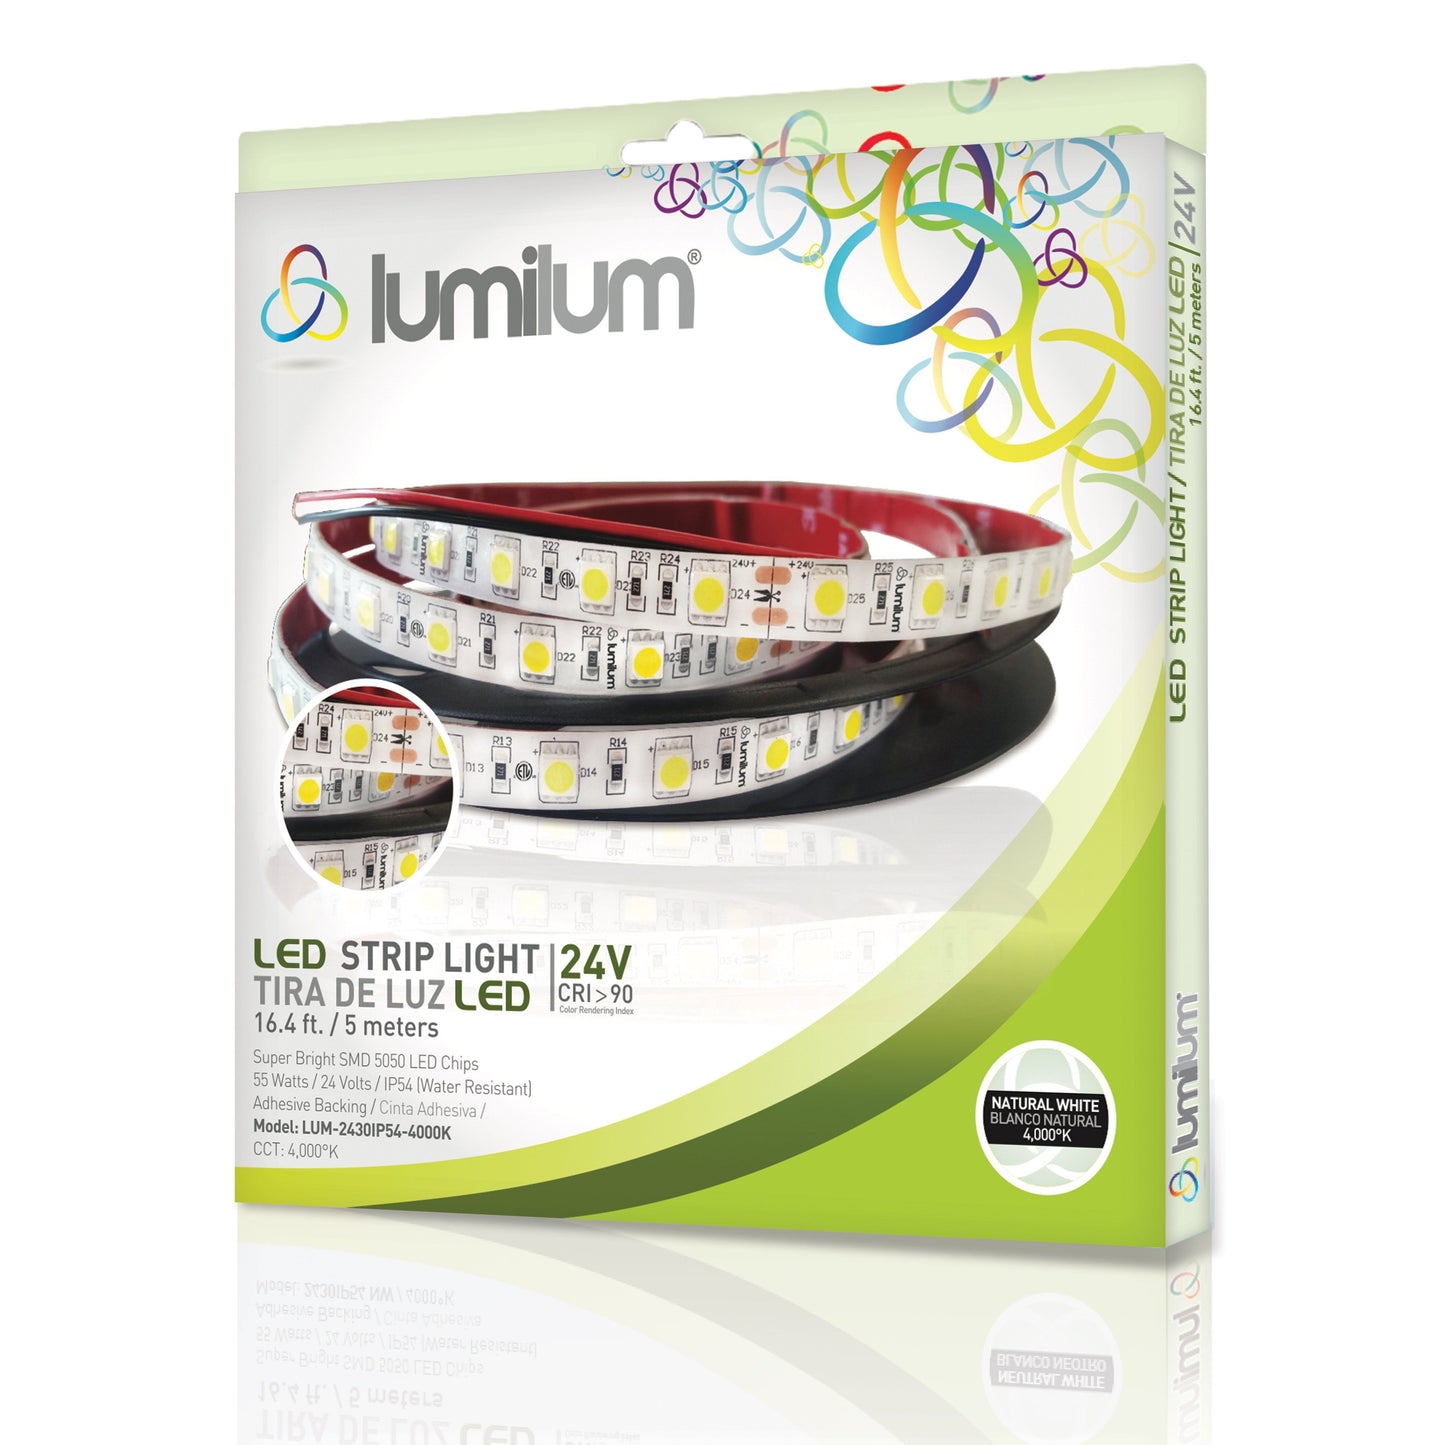 lumilum brand led strip light packaging in green with strip light image and 4000k product information text